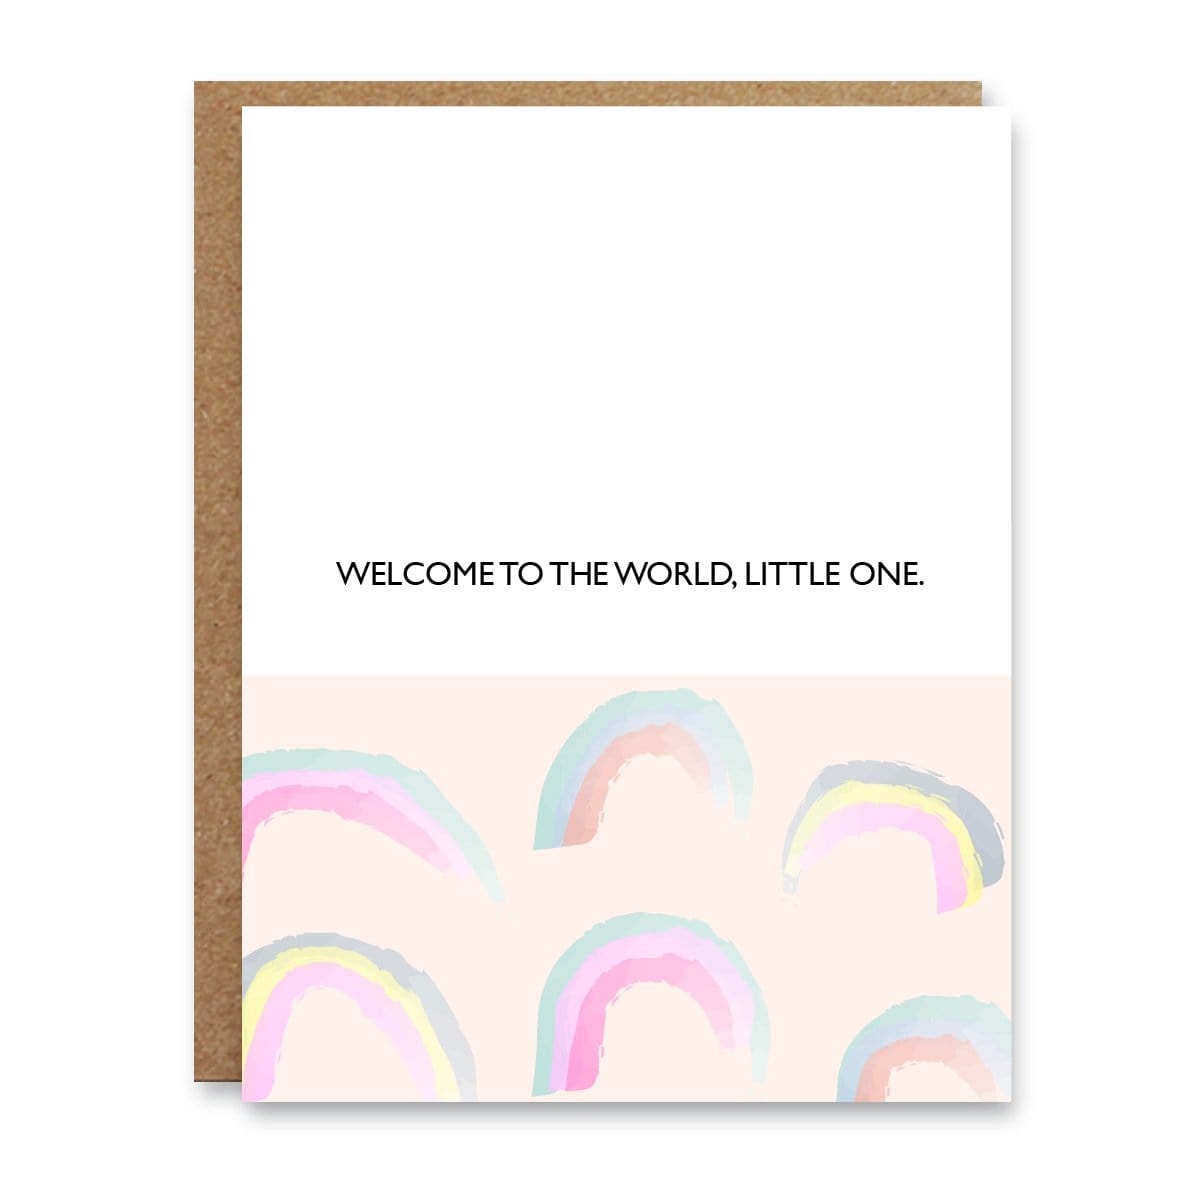 Boo To You Greeting Cards greeting card Boo To You 'Welcome To The World, Little One' Greeting Card